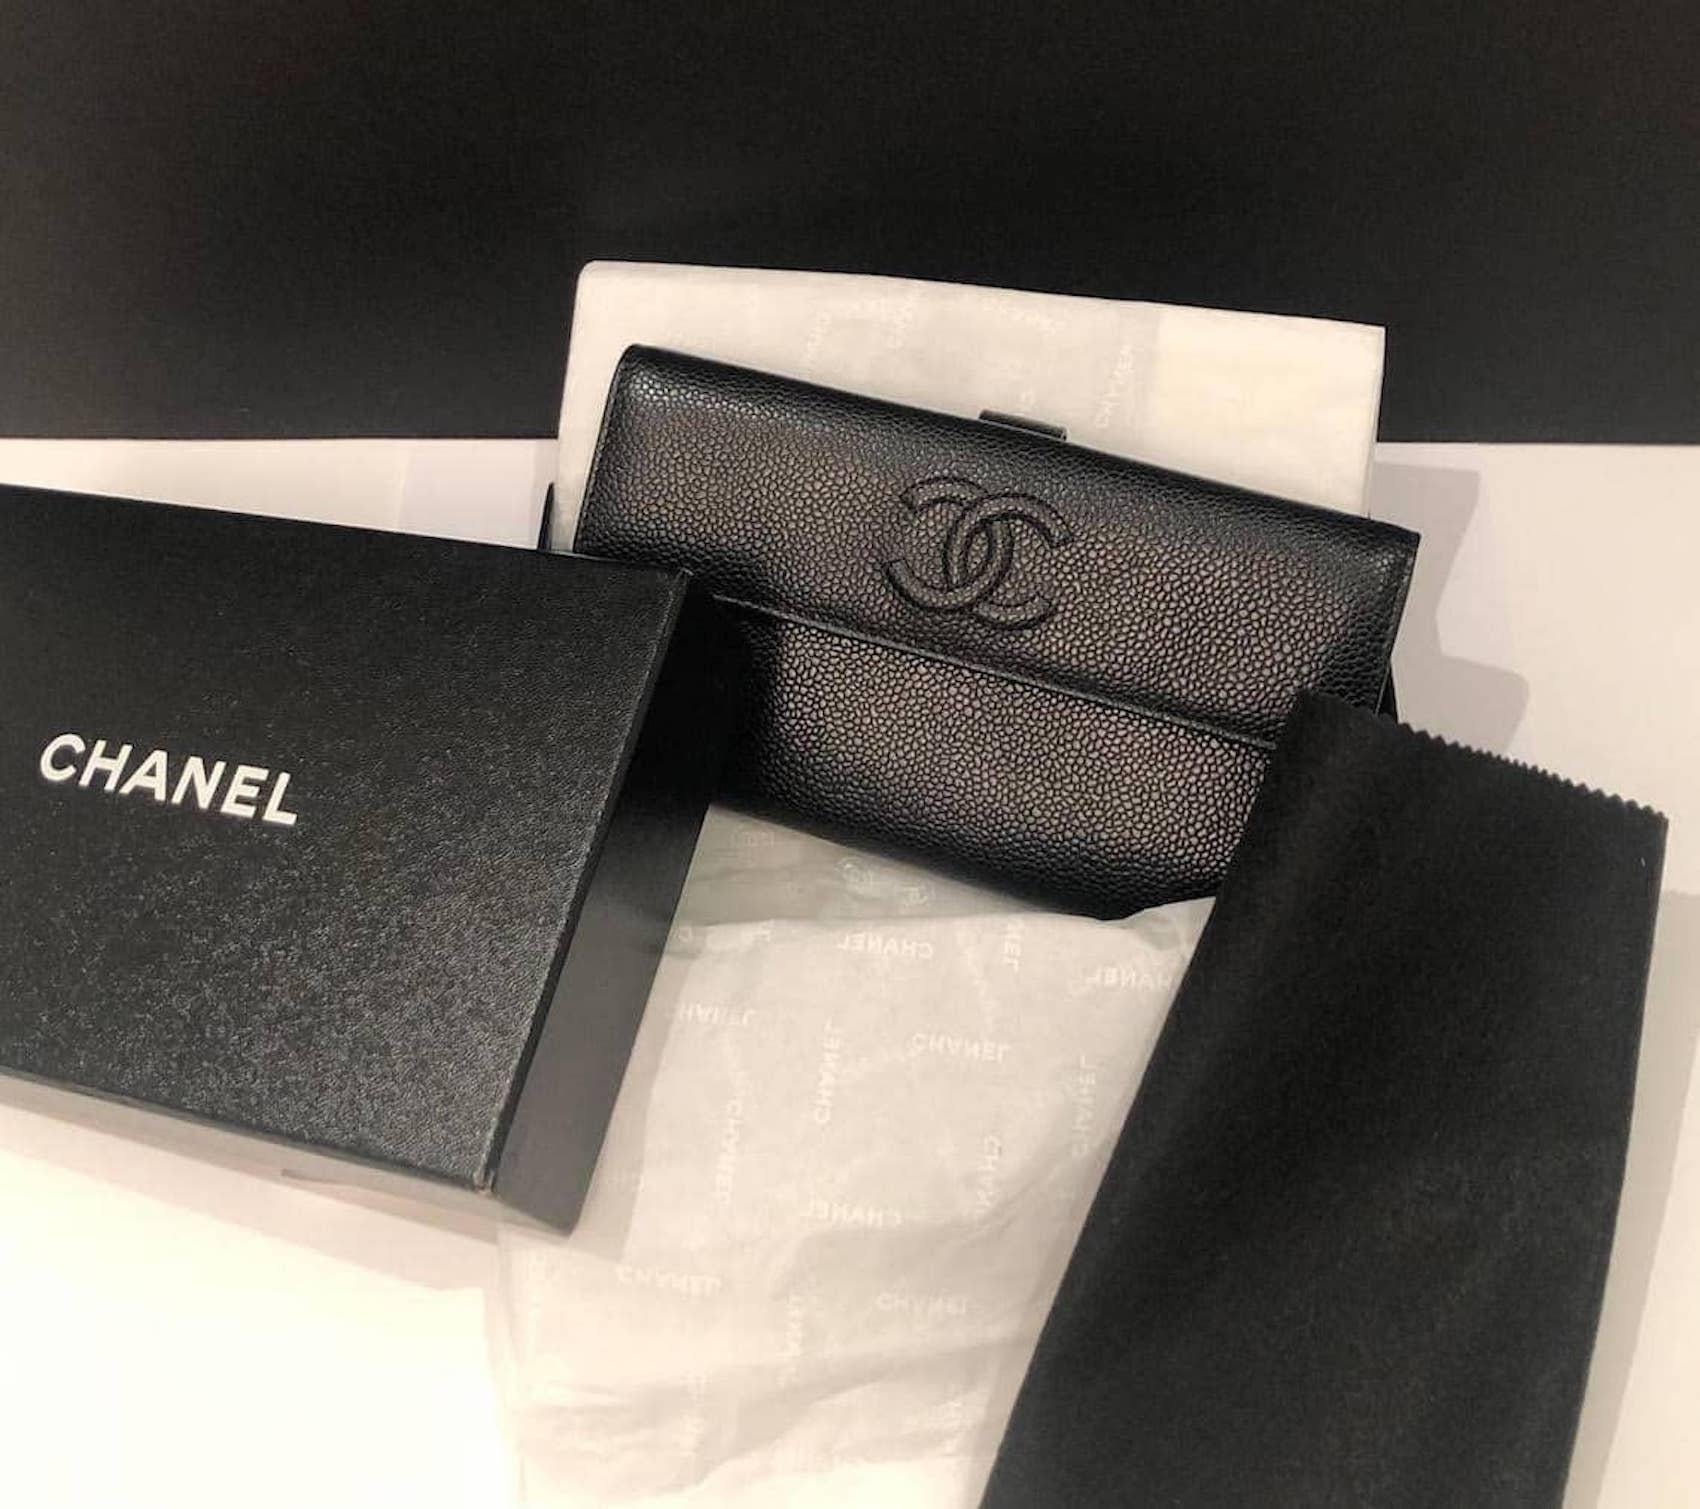 CHANEL Black Caviar Leather CC Logo Long Snap Bifold Wallet 2010 W/Box
A stylish pre-owned hardy worn, 2010-2011 Chanel Bi-Fold long wallet handcrafted from luxurious black grained caviar calfskin leather with silver hardware. Black colour, large CC